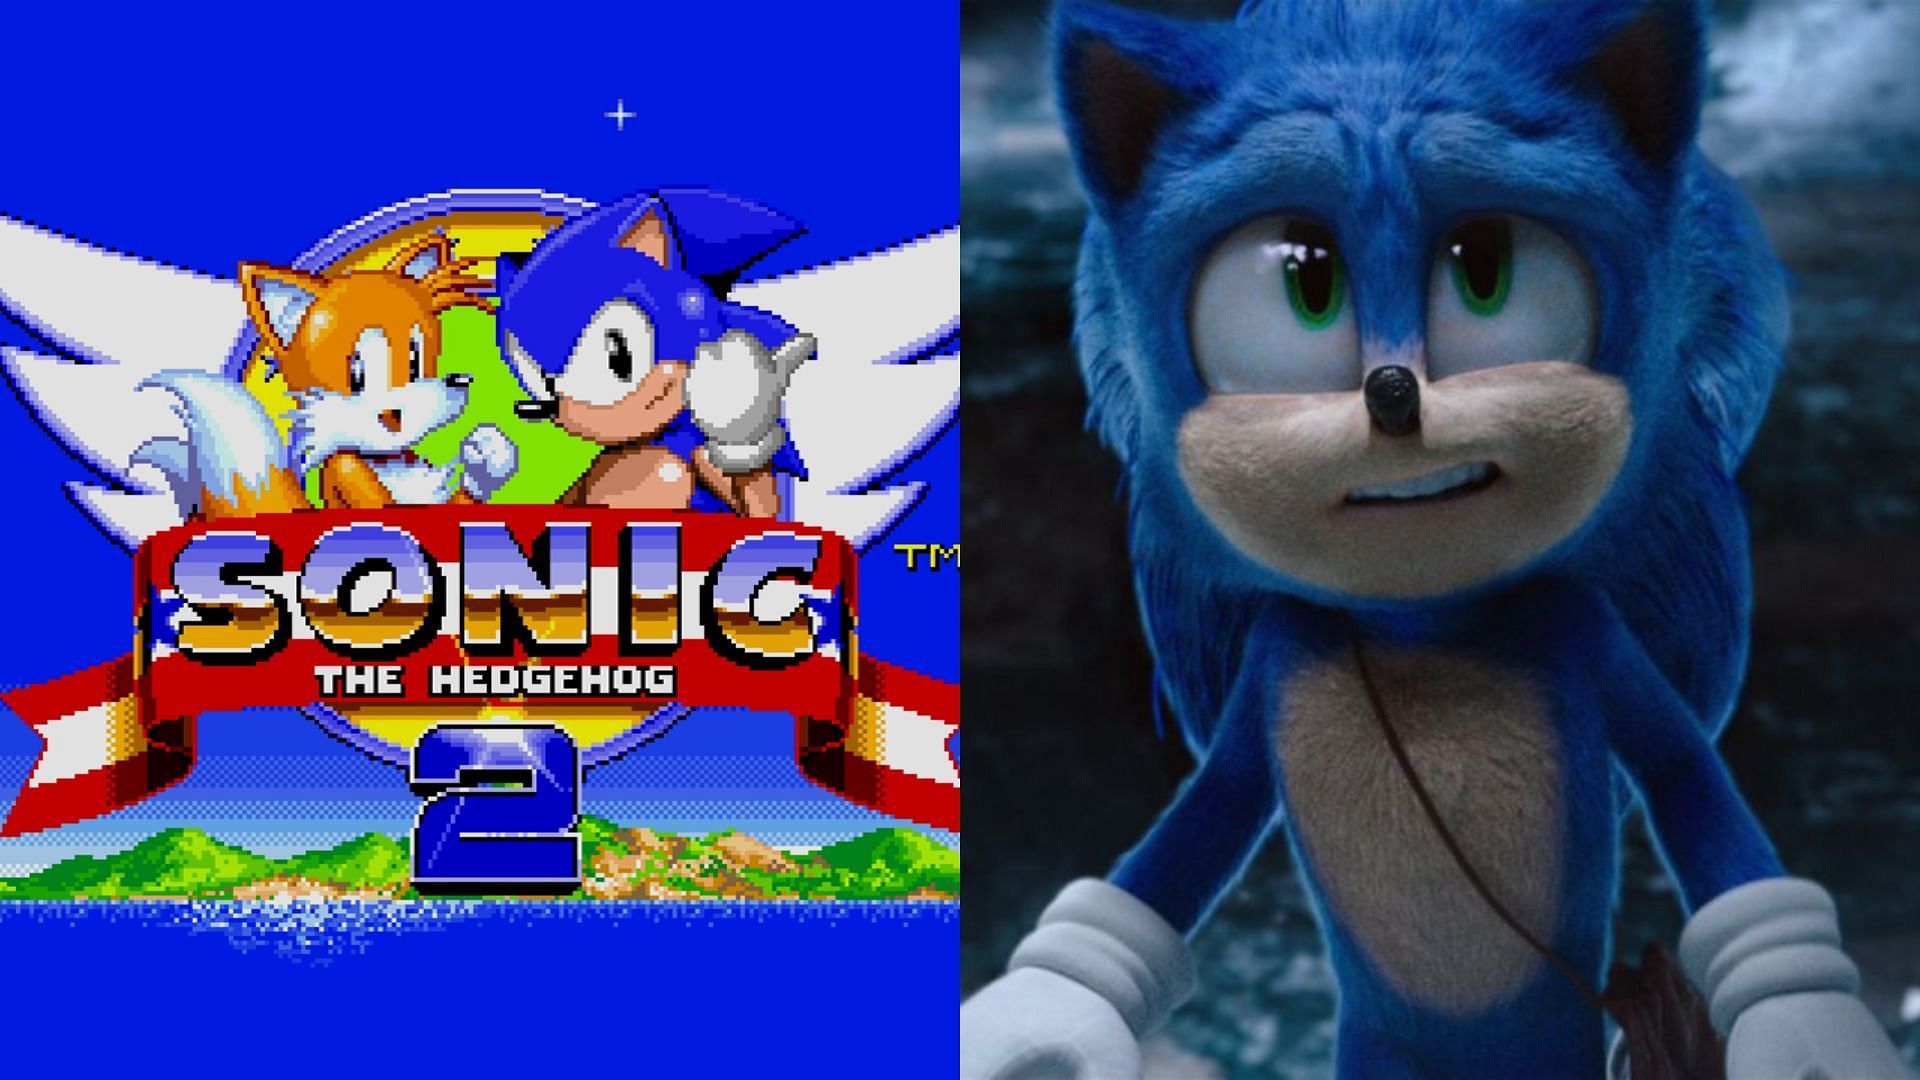 According to Sonic Team&#039;s head, the game Sonic and movie Sonic need to remain separate (Image via SEGA)